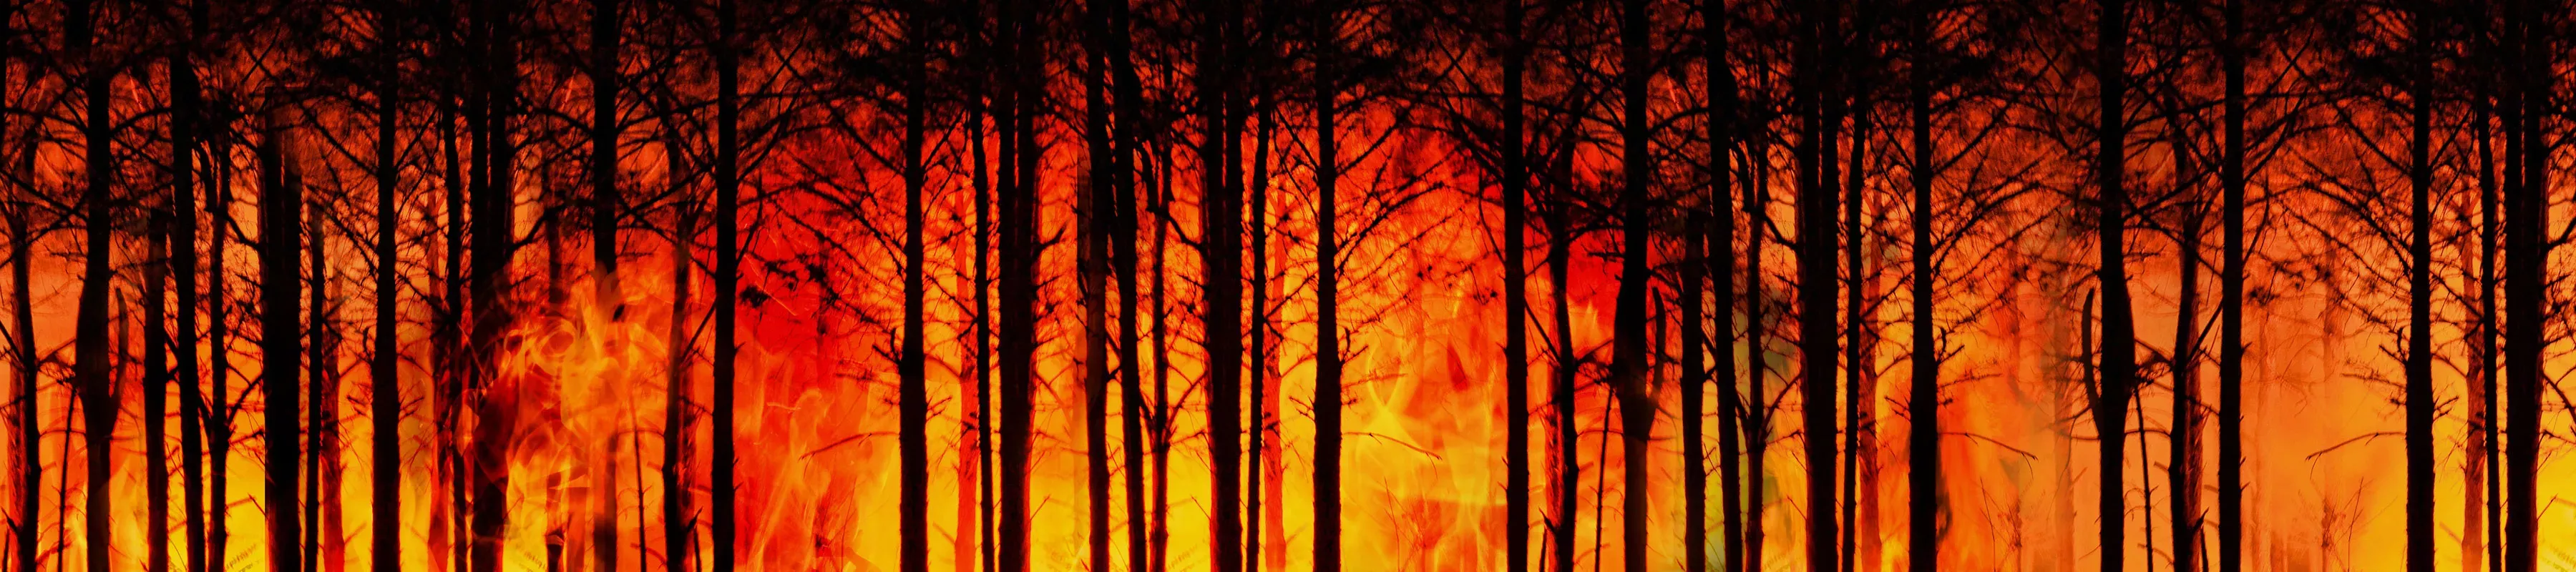 Tree trunks surrounded by raging orange flames